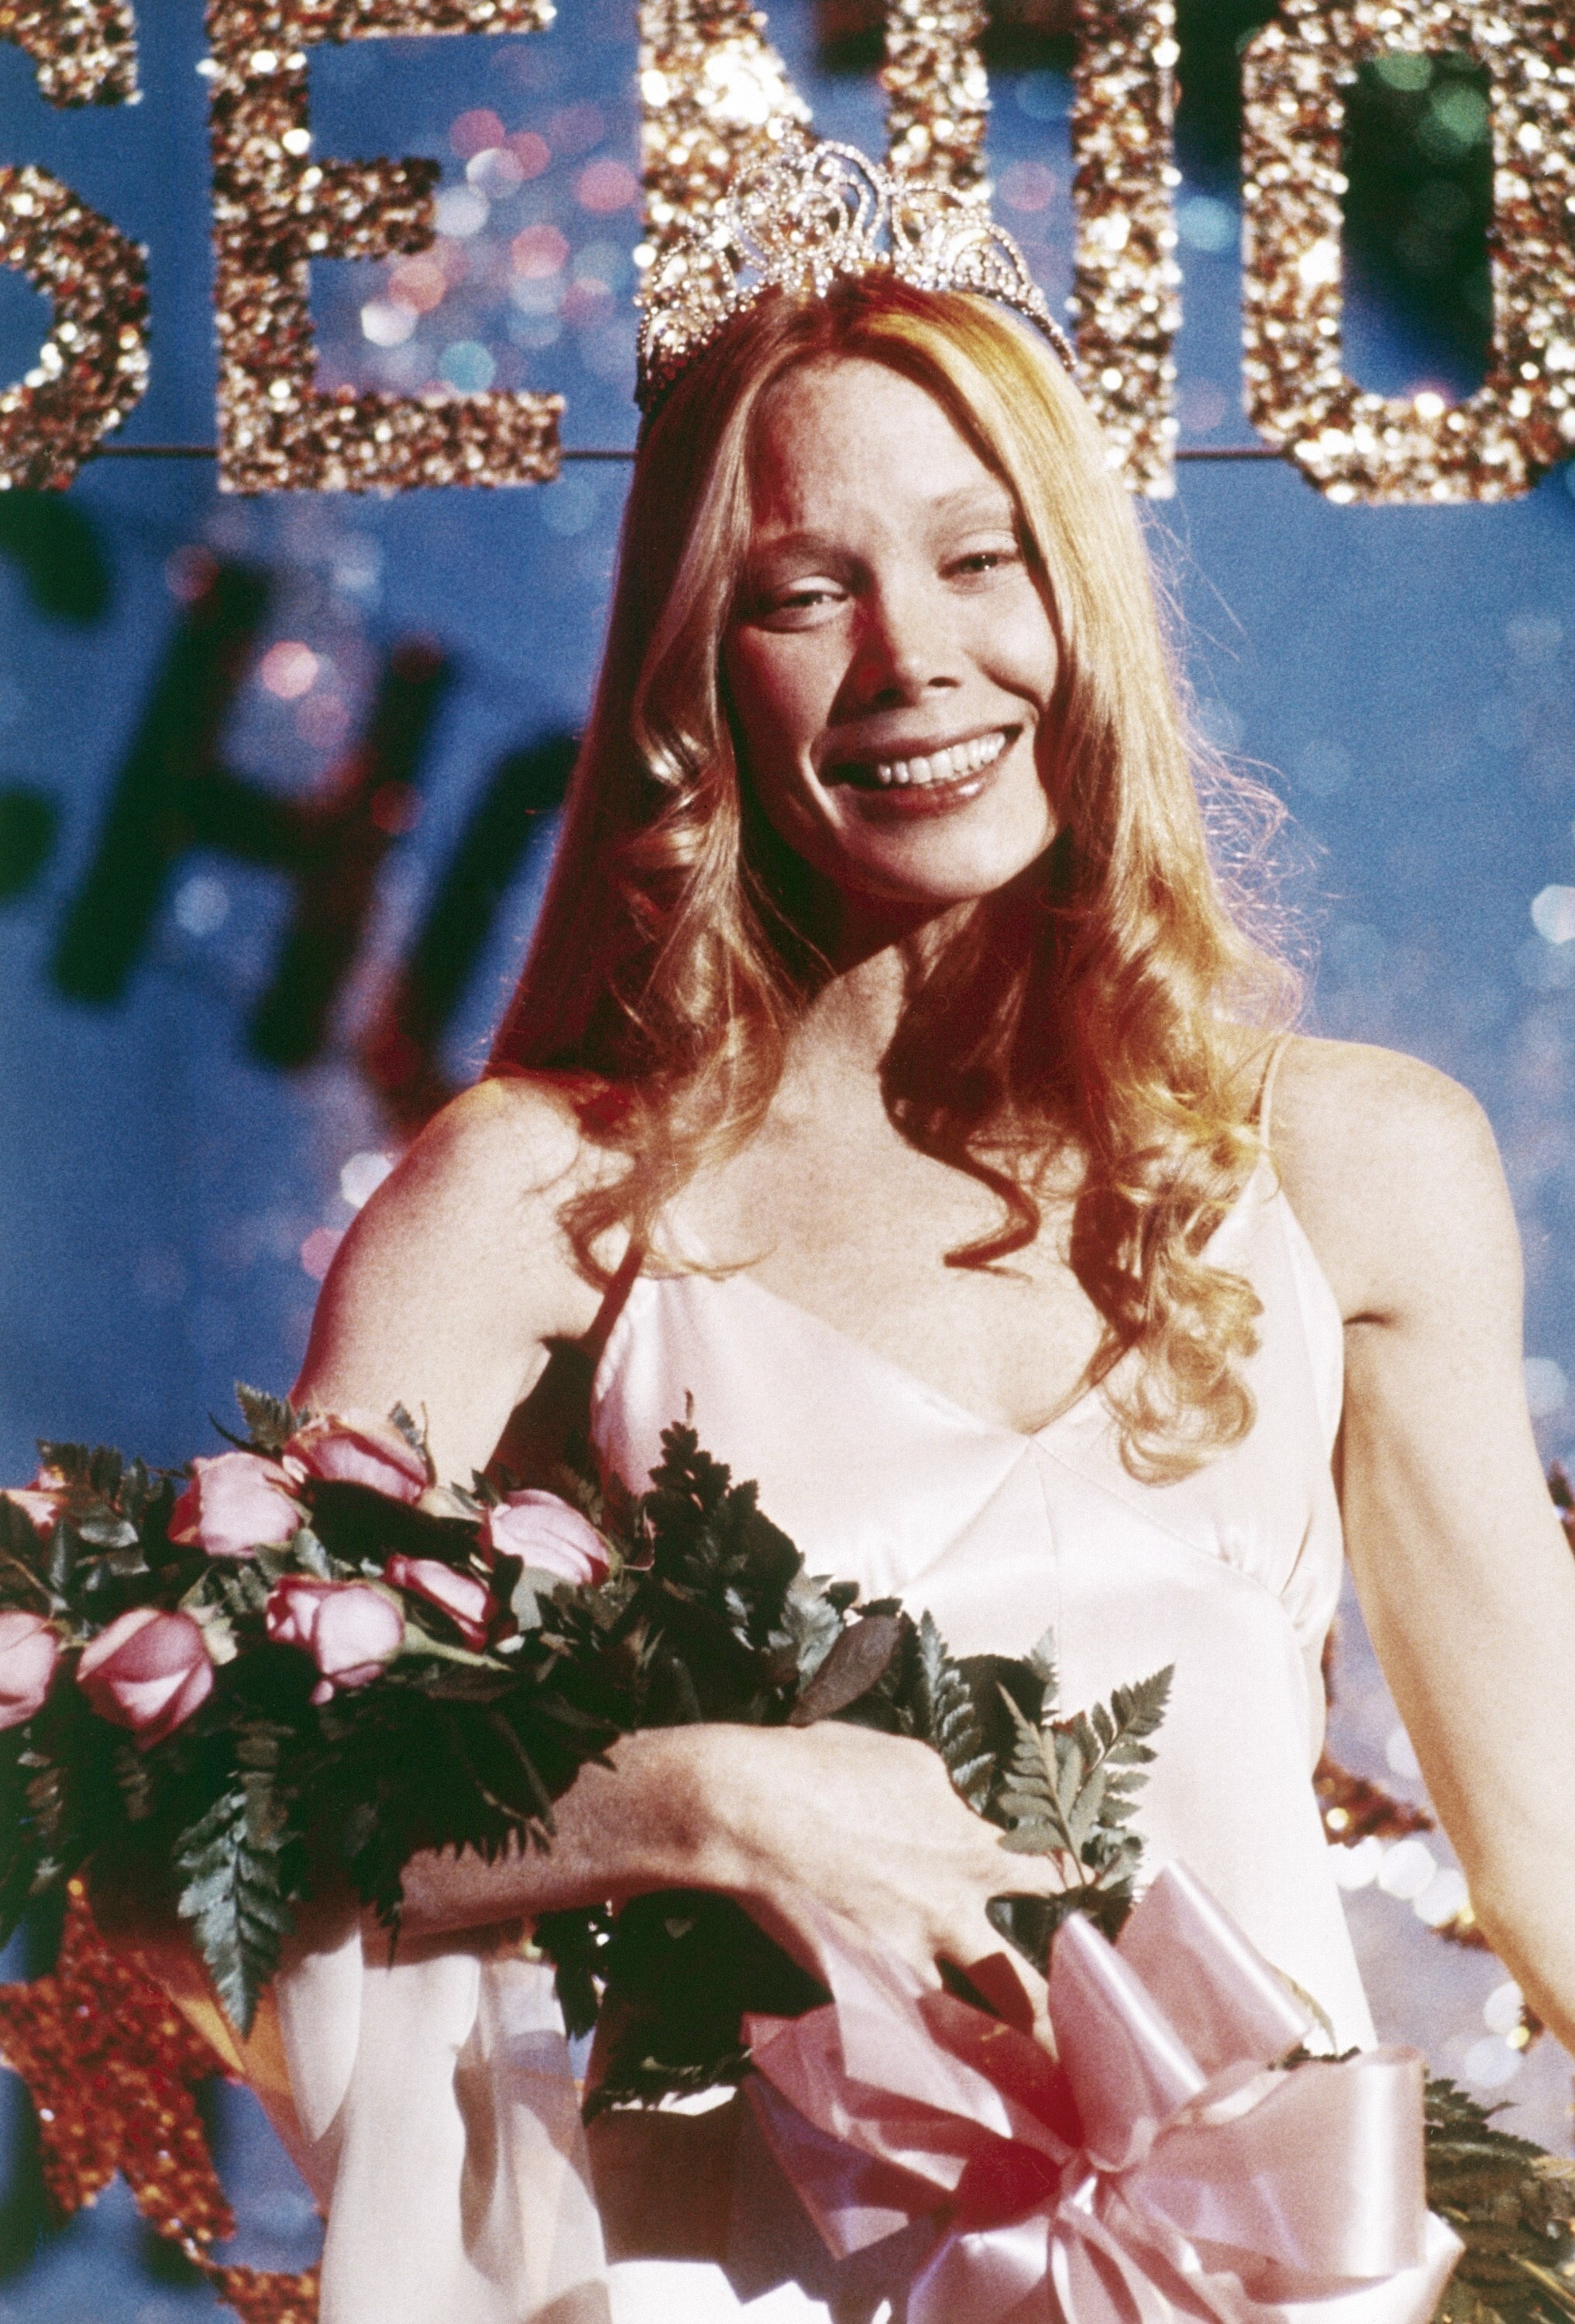 Carrie wearing her crown and holding her flowers